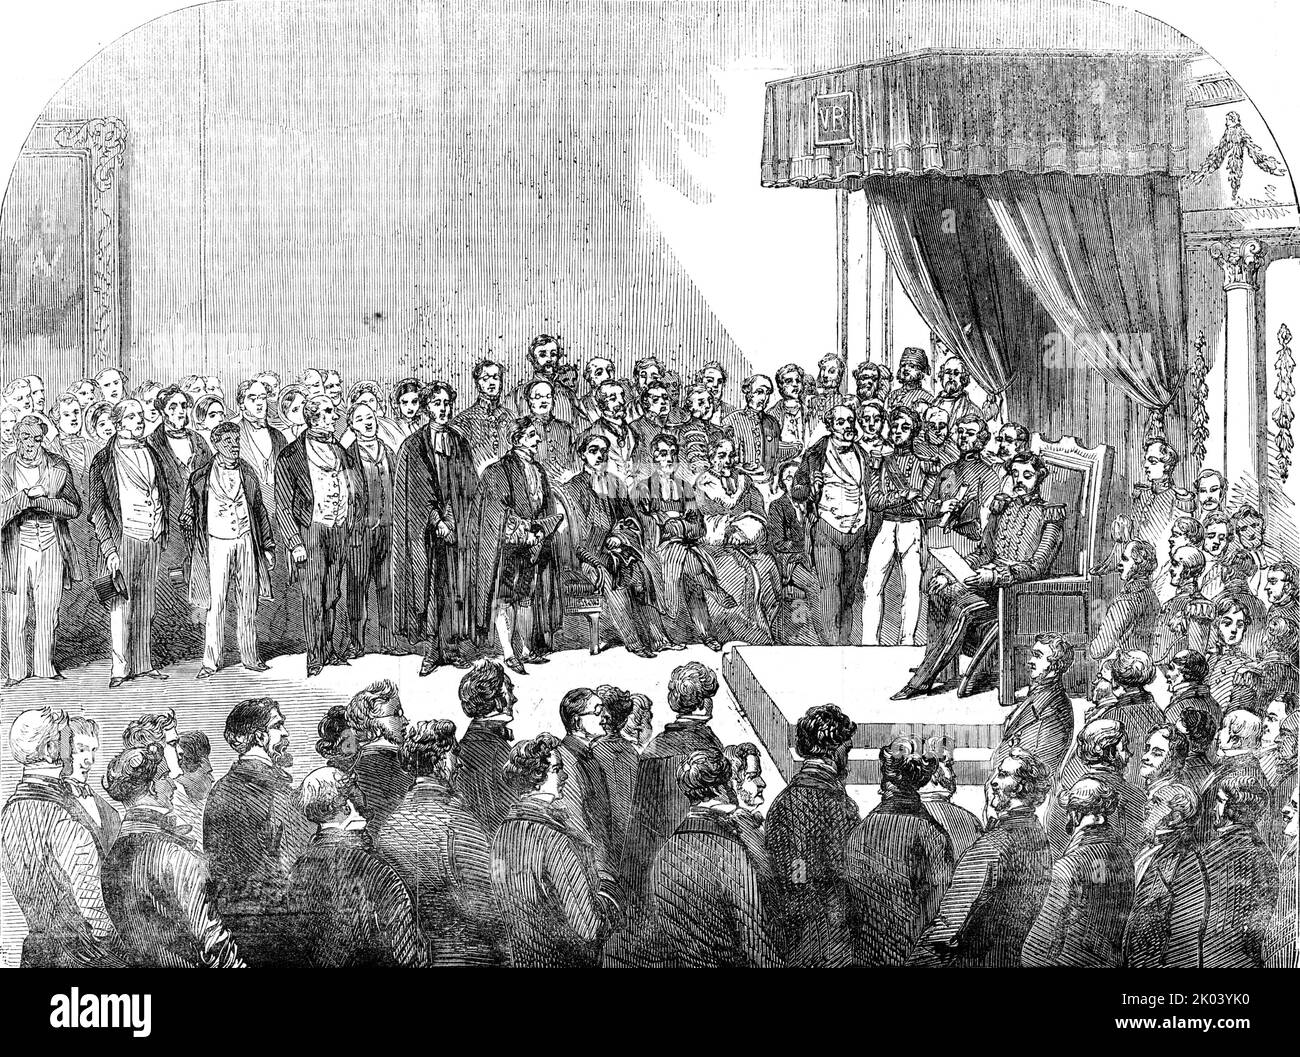 Opening of the First Cape Parliament, in the State-Room, Cape Town, 1854. Ceremony in at Government House - Charles Henry Darling, Lieutenant-Governor of the Cape Colony (in what is now South Africa), makes his maiden speech to the colonial parliament.. '...the Legislative Council, headed by their President, Sir John Wylde, in his robes, arrived and took their seats, when the Castle guns announced the approach of the Lieutenant-Governor. [His speech] certainly bore a much stronger resemblance to an American President's Message than it did to a Queen's Speech...the Lieutenant Governor adverted Stock Photo